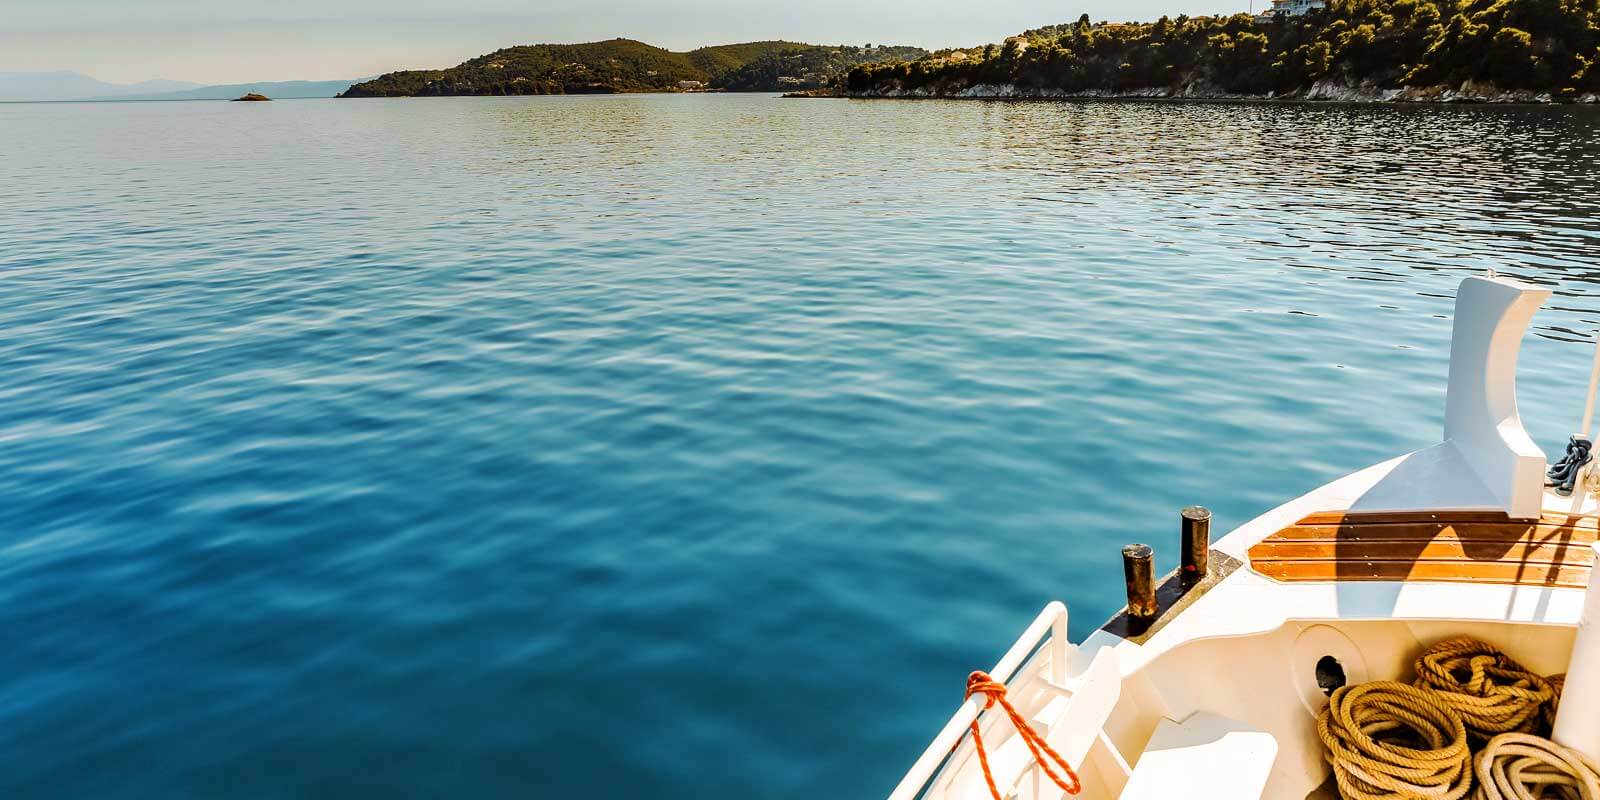 Sail the islands between Greece + Turkey in an epic adventure